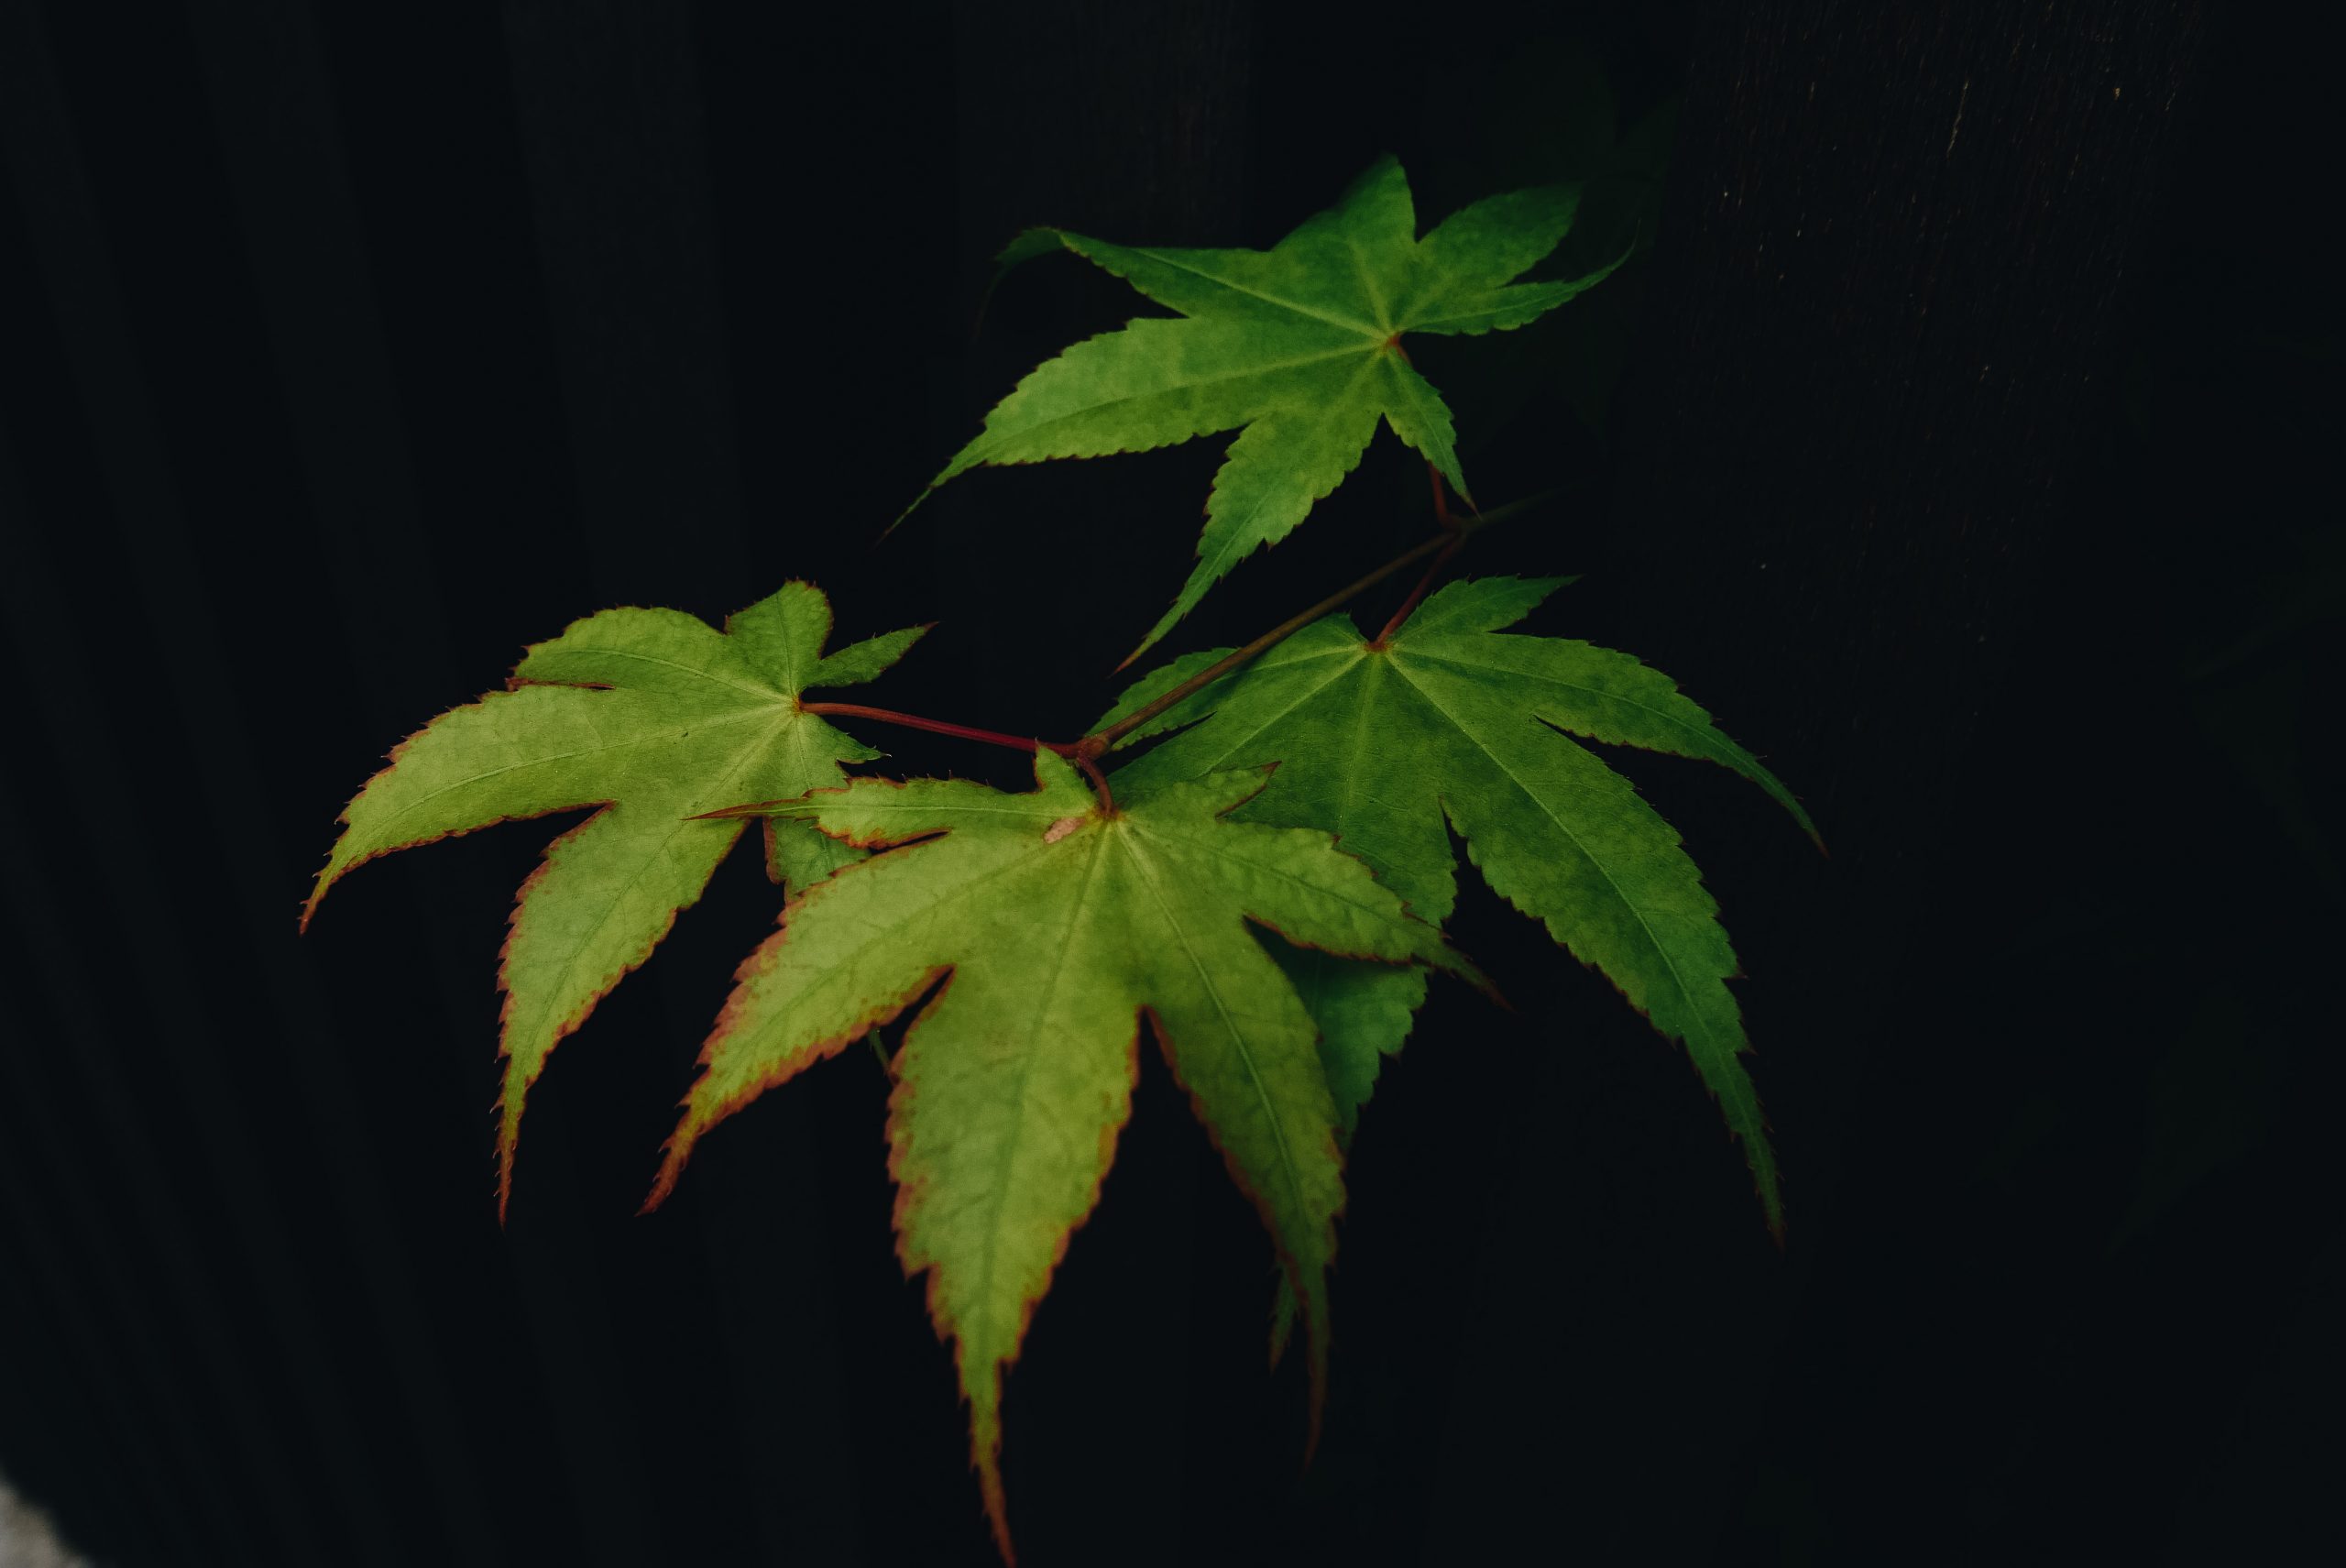 Green leaves and black background. Kyoto, 2018